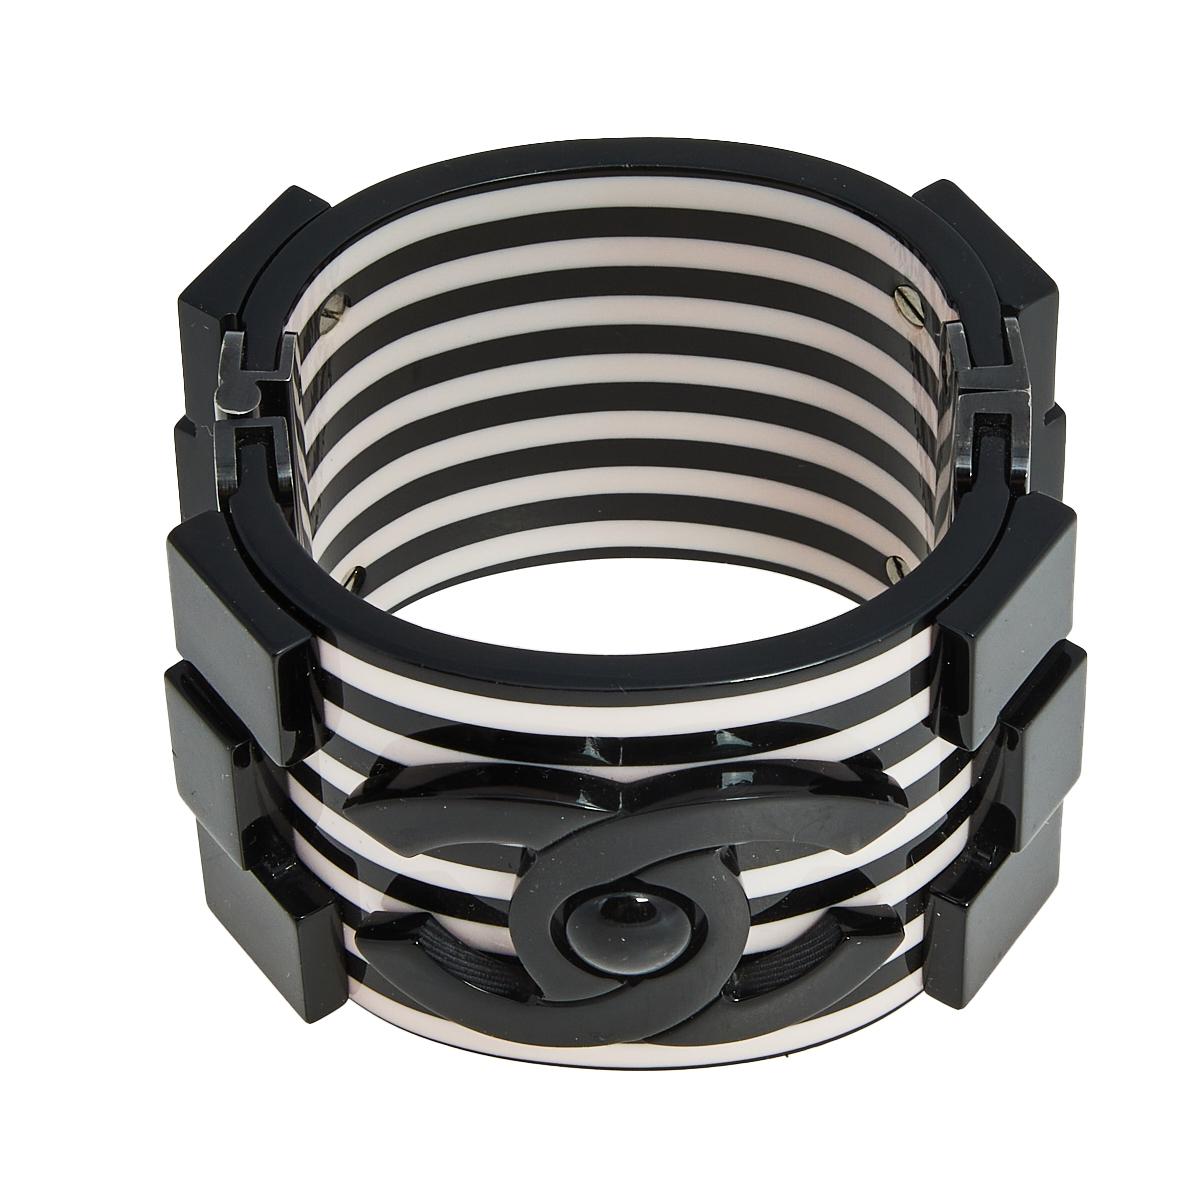 Constructed using black-tone metal and resin in a cuff design, this Chanel bracelet is sure to fit well and look great on your wrist. It comes in its original box.

Includes: Original Box